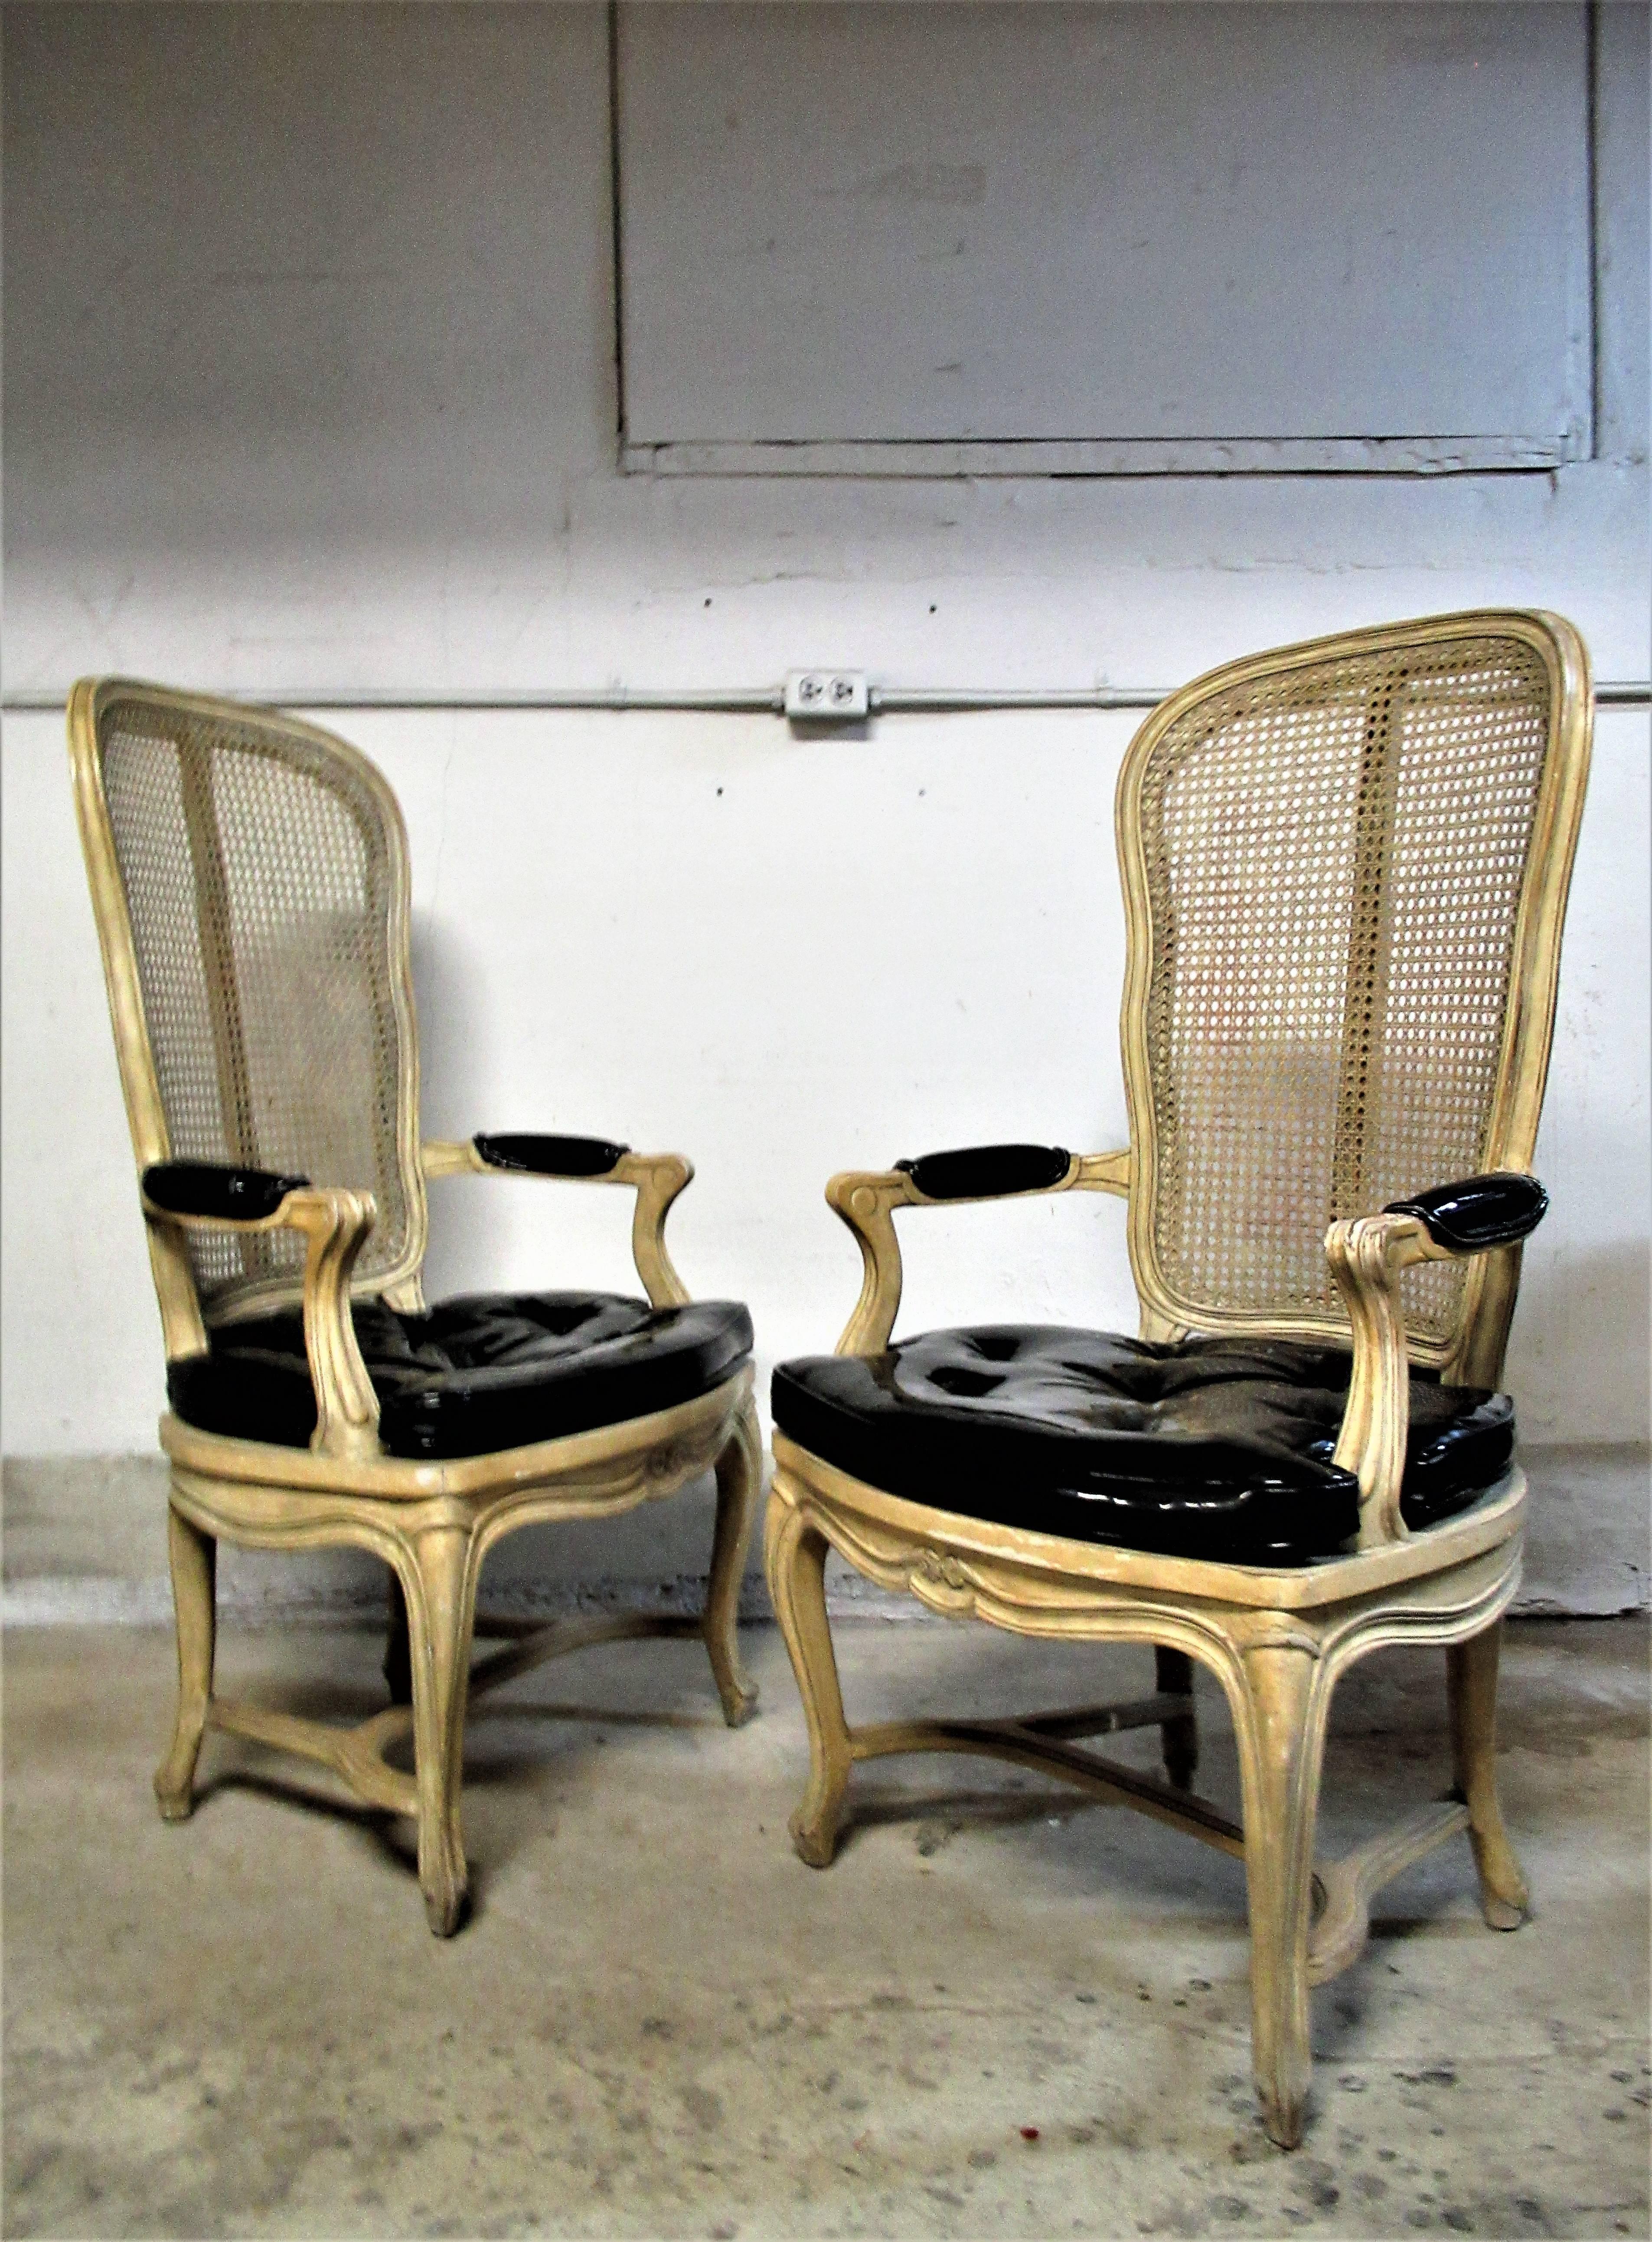 Pair of original pale cream painted Hollywood Regency tall cane back chairs in the Louis XV style with seat cushions and armrests in a high gloss black patent faux leather. Most likely Italian, circa 1960s. Good looking chairs.